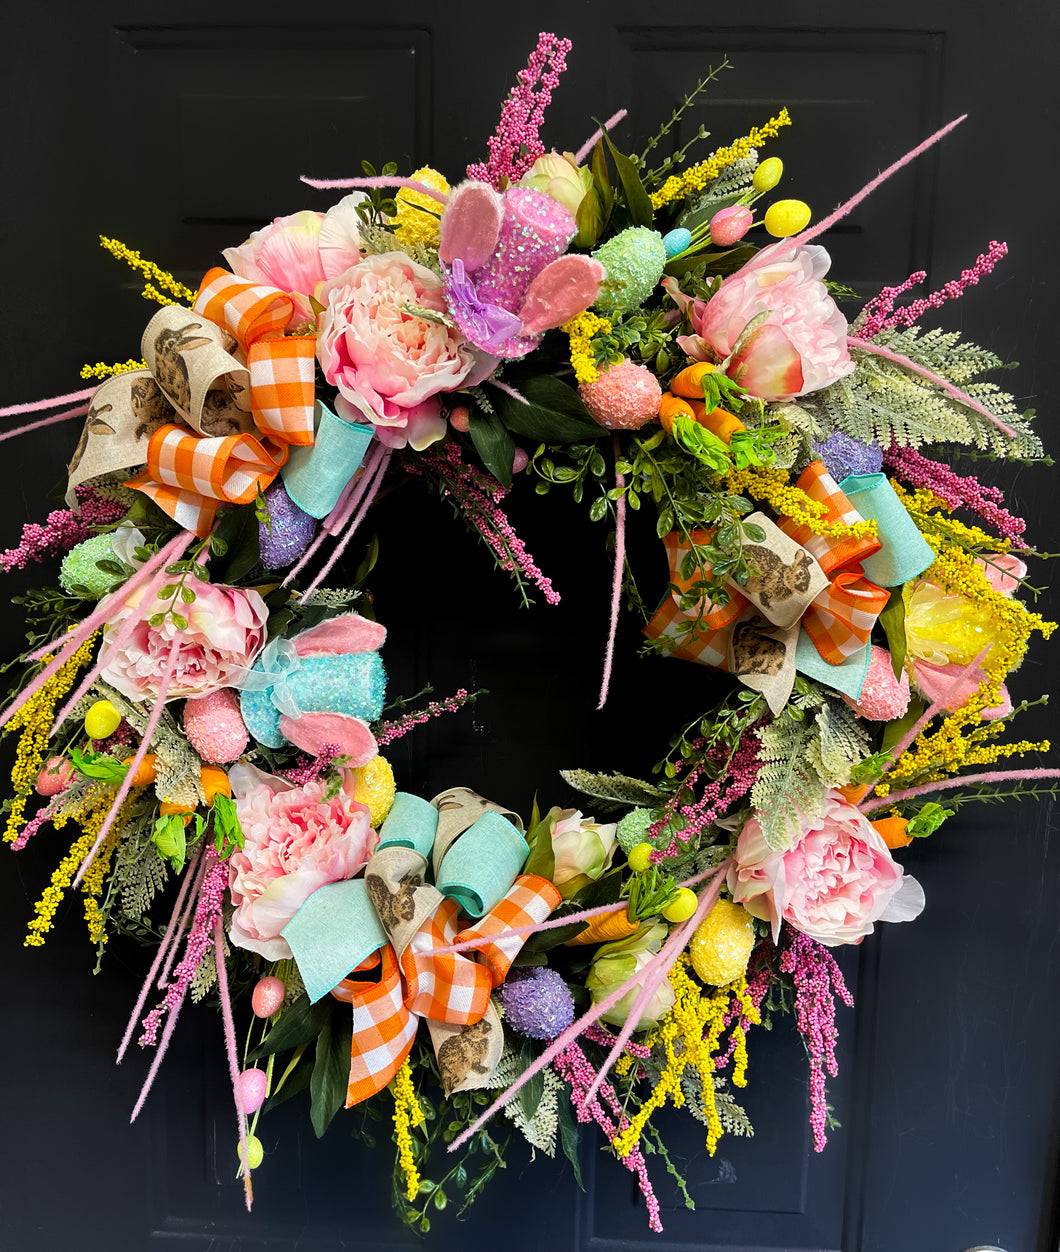 The Perfectly Round Spring Rabbit Top Hat Wreath